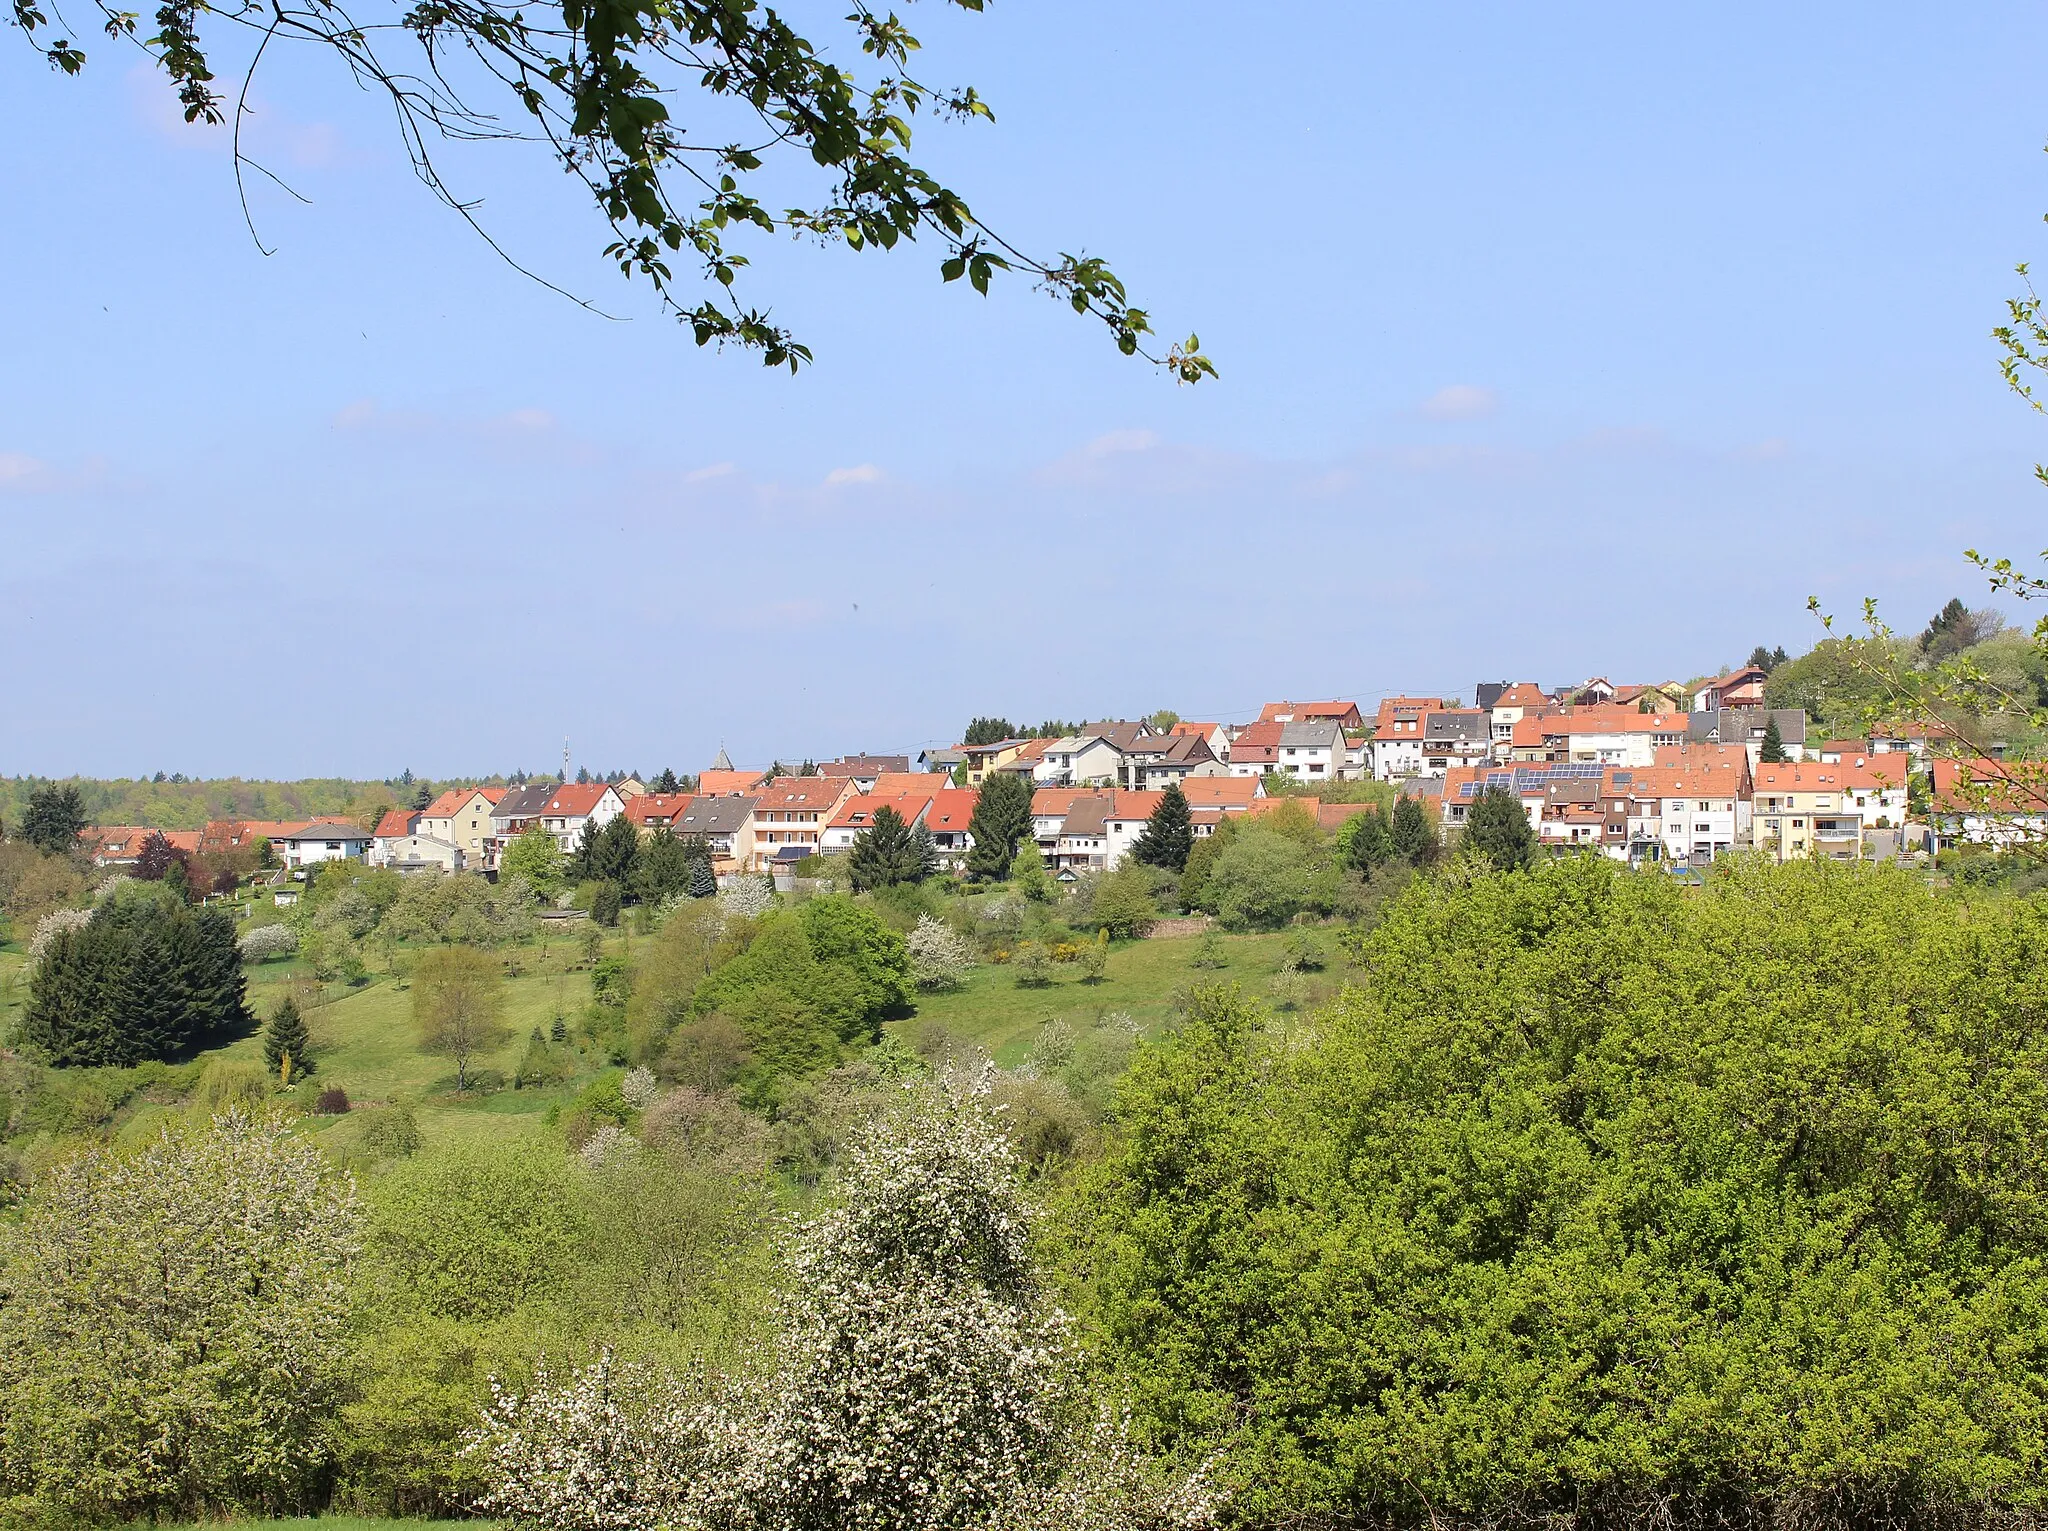 Photo showing: View of Münchwies, a district of Neunkirchen, Saarland